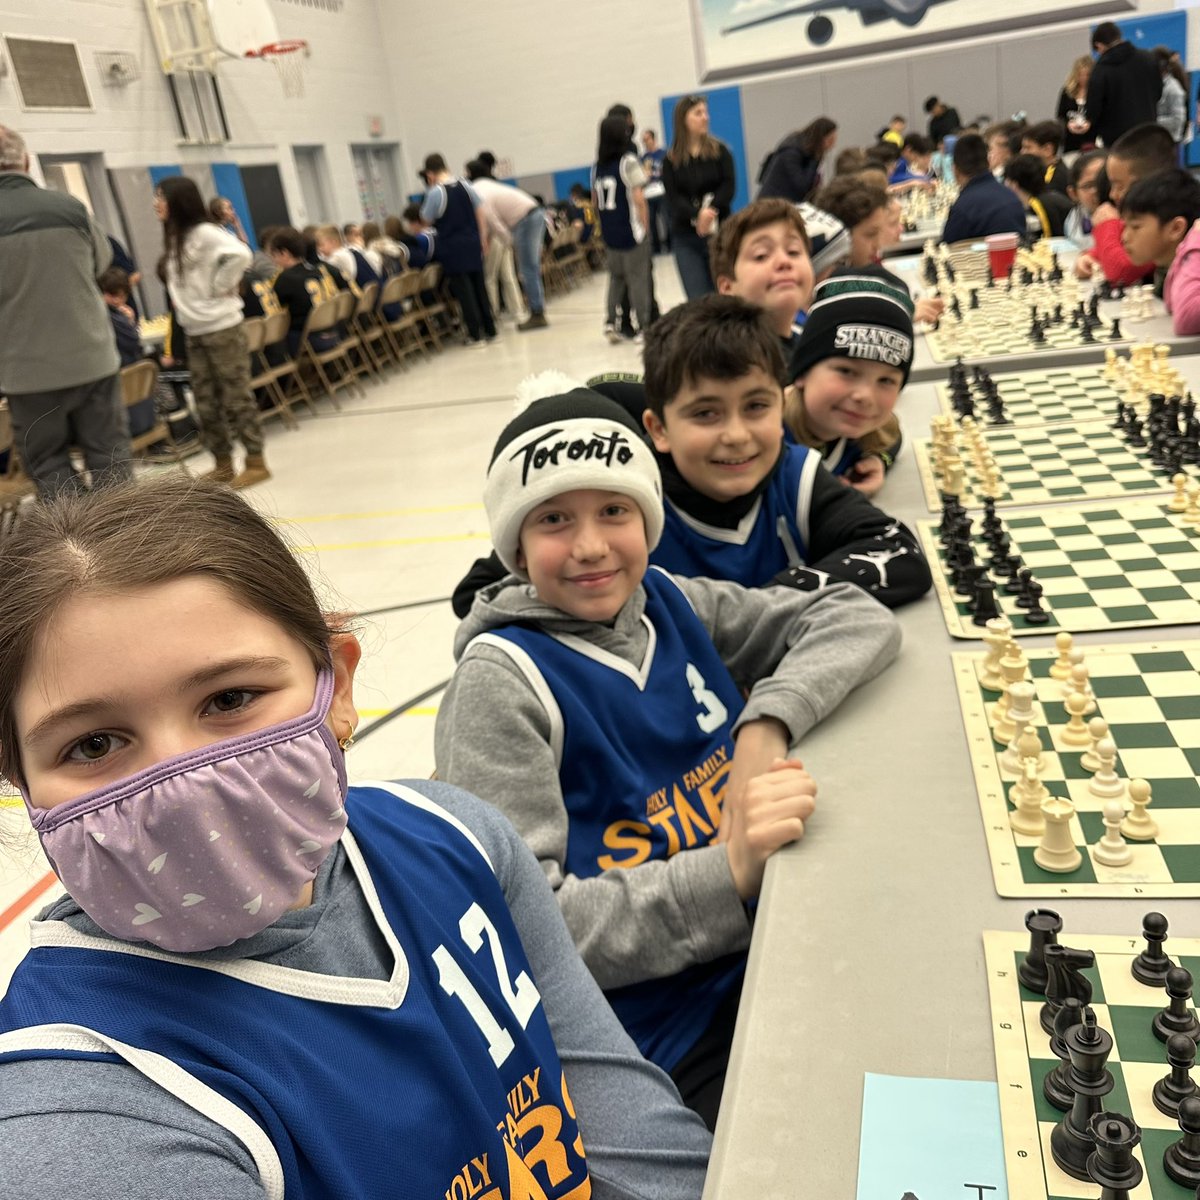 Congratulations to the Junior Chess Team who placed 4th today!! Way to go stars! ♟️⭐️ @HOFAM_DPCDSB @MmeNaccarato